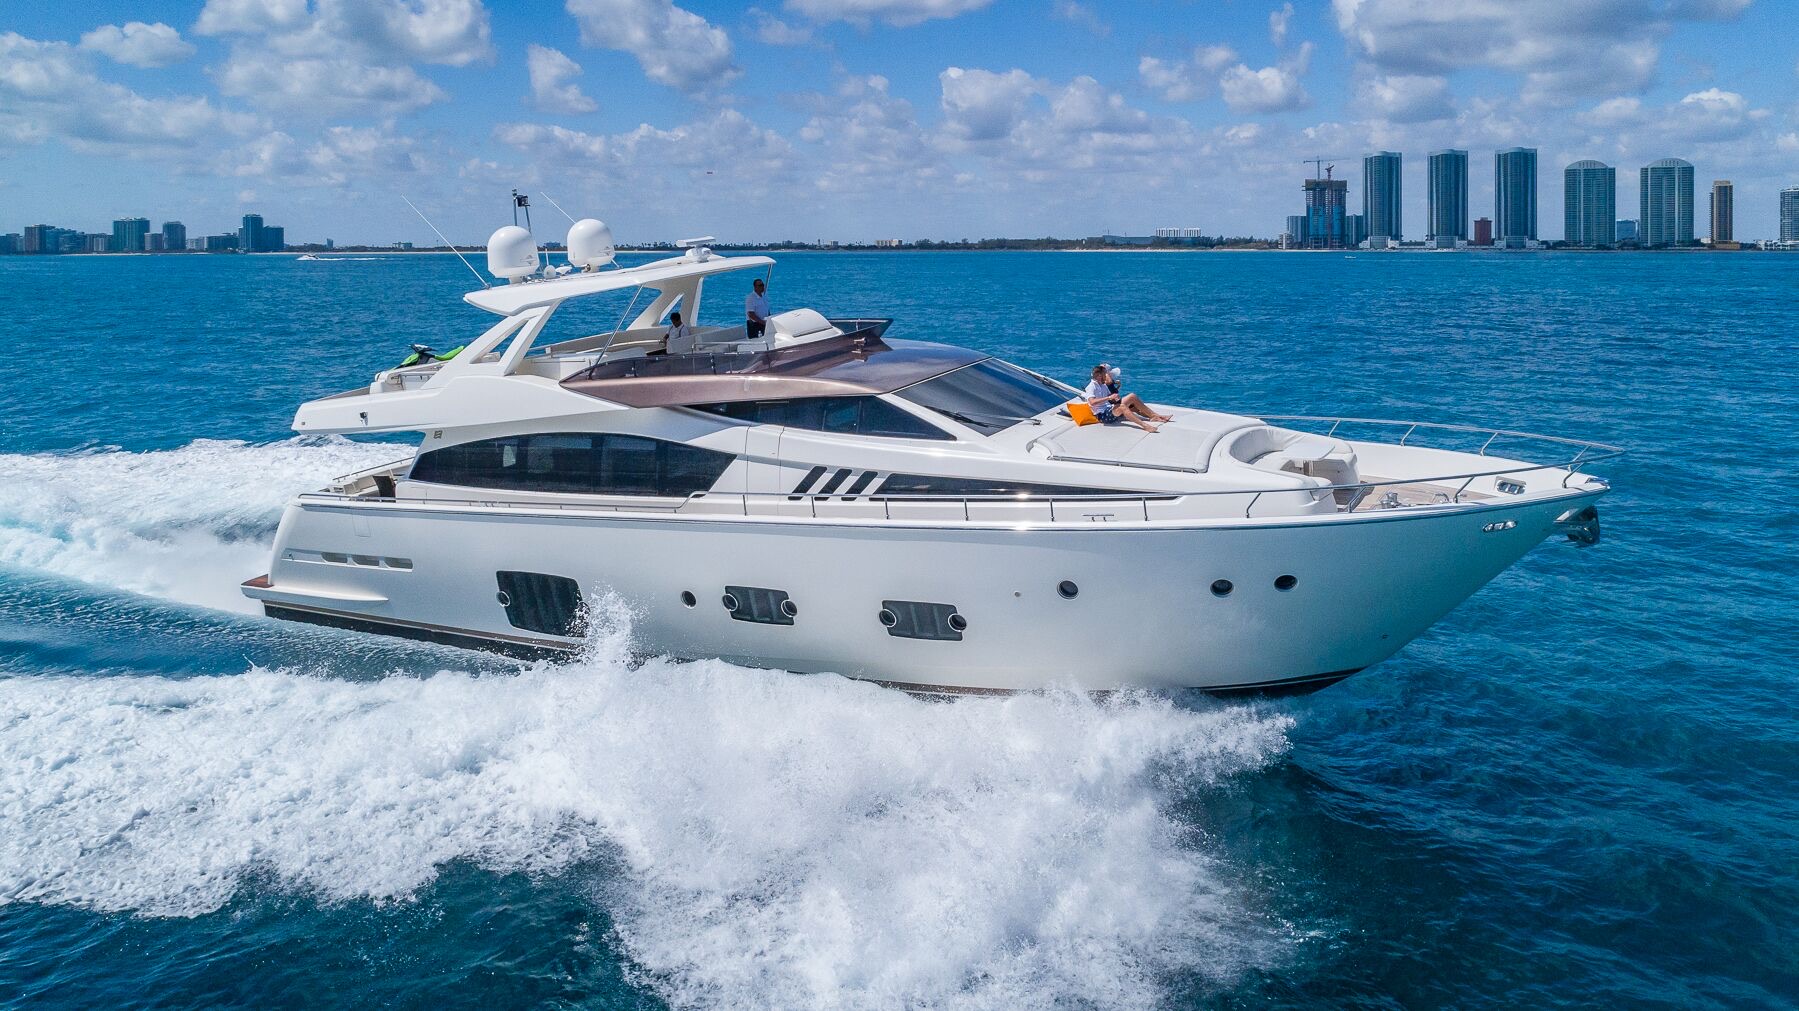 how much are yacht rentals in miami